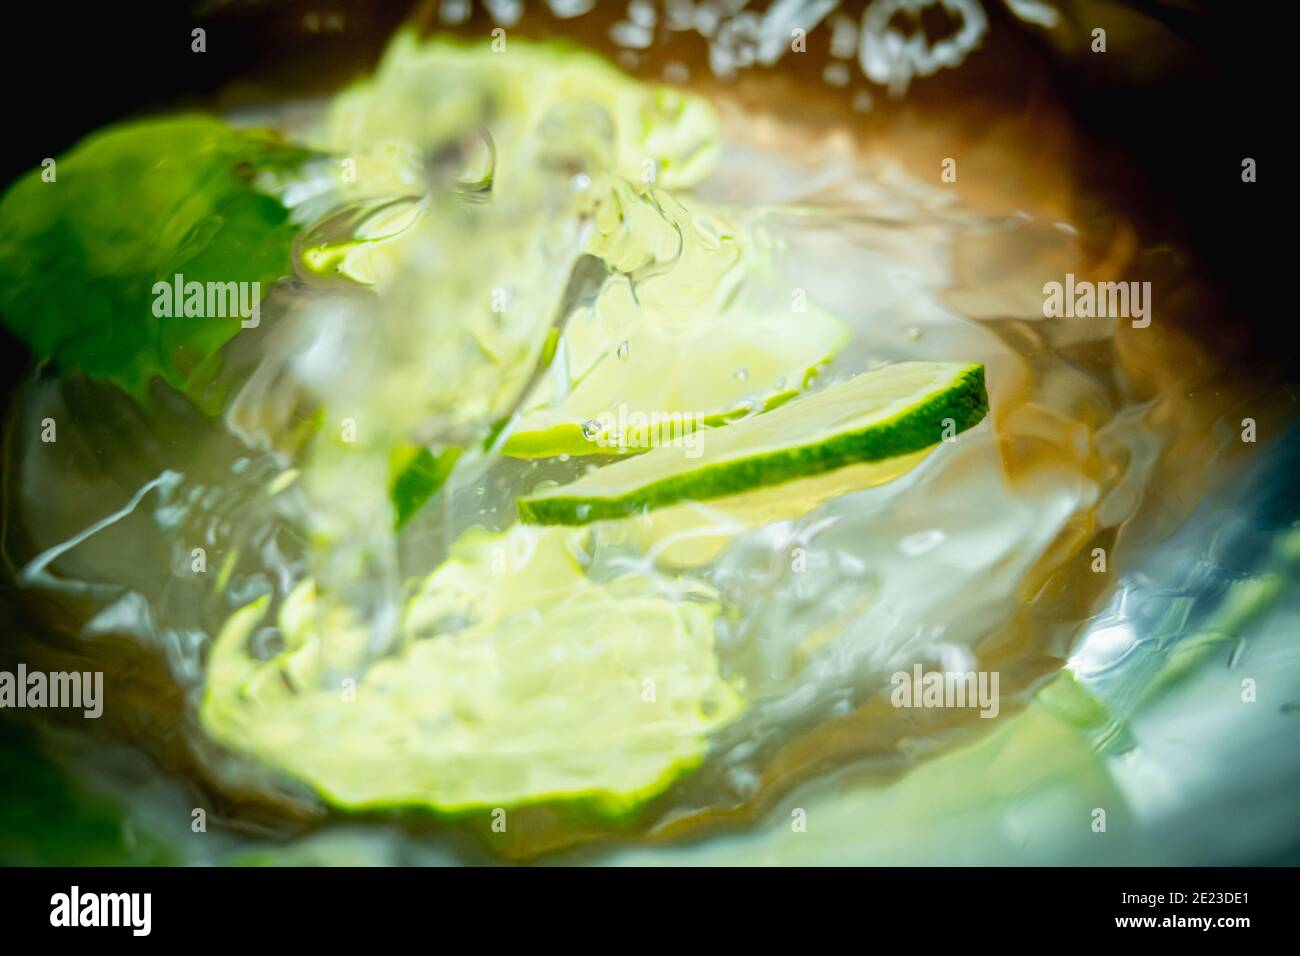 Lime in a glass of water. Stock Photo